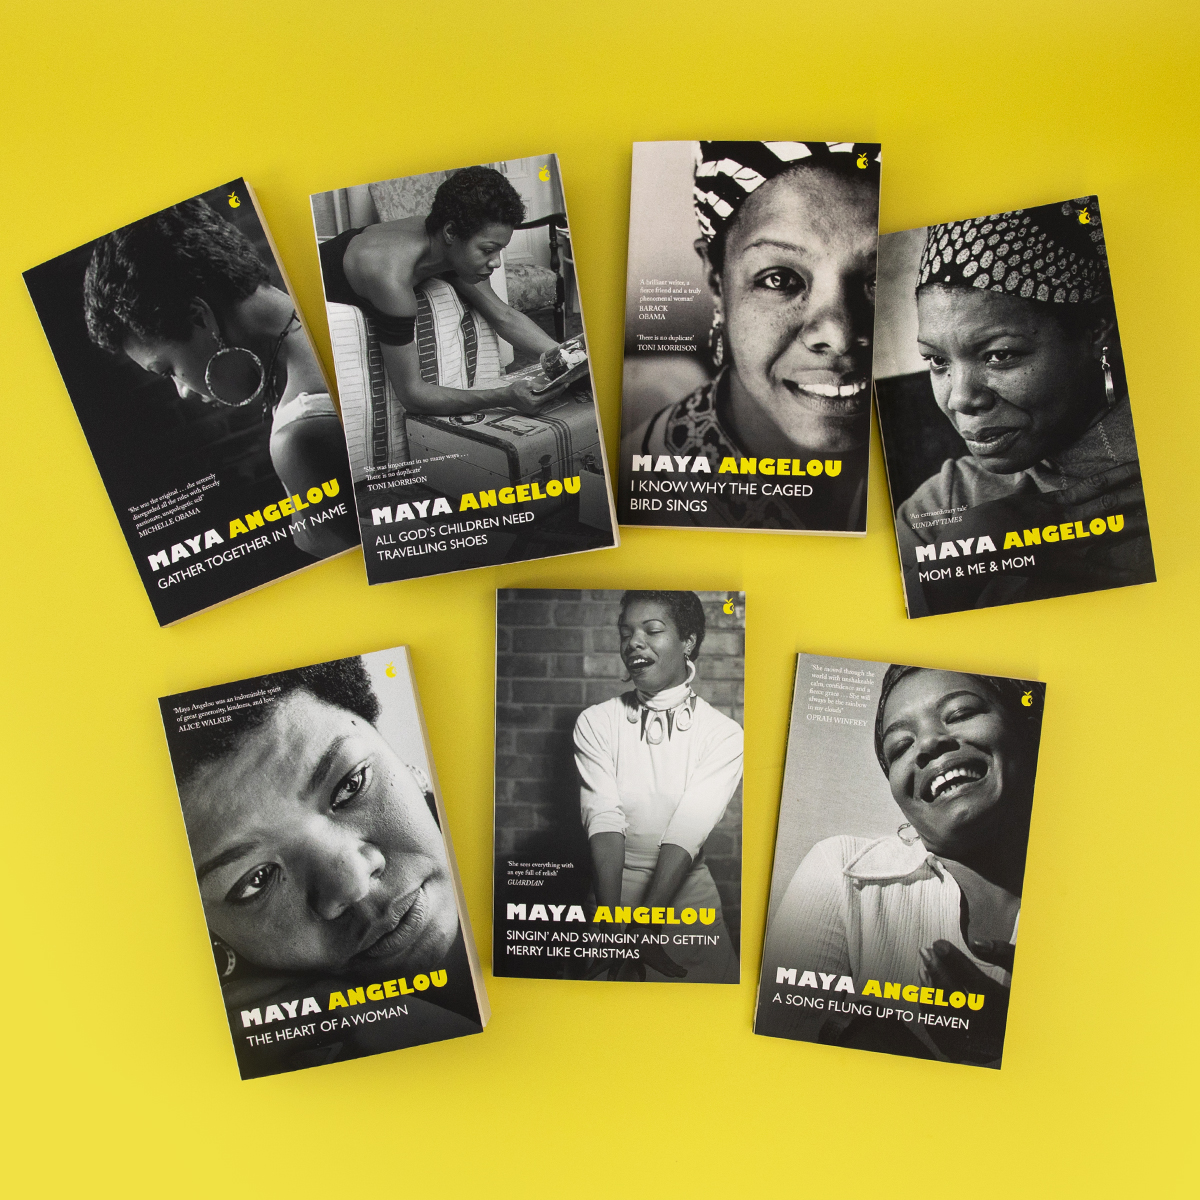 ‘She lived life as if it had been created just for her.’ - Maya Angelou, A Song Flung Up to Heaven Discover all seven volumes of Dr Angelou's autobiographical writing: brnw.ch/21wIMYr #MayaAngelou #ViragoModernClassics